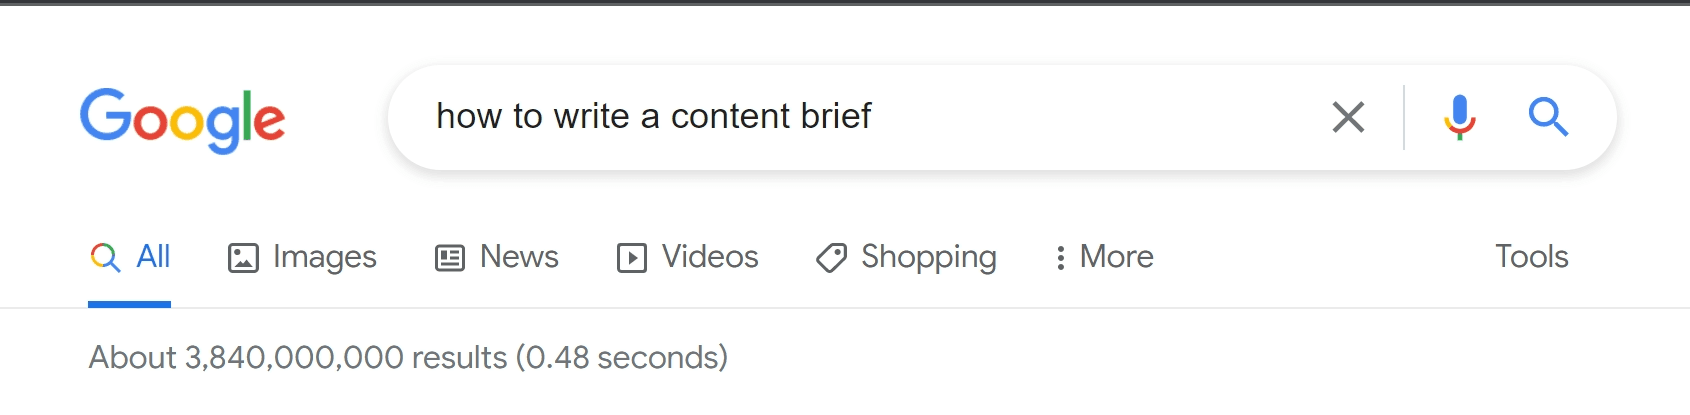 serp how to write a content brief